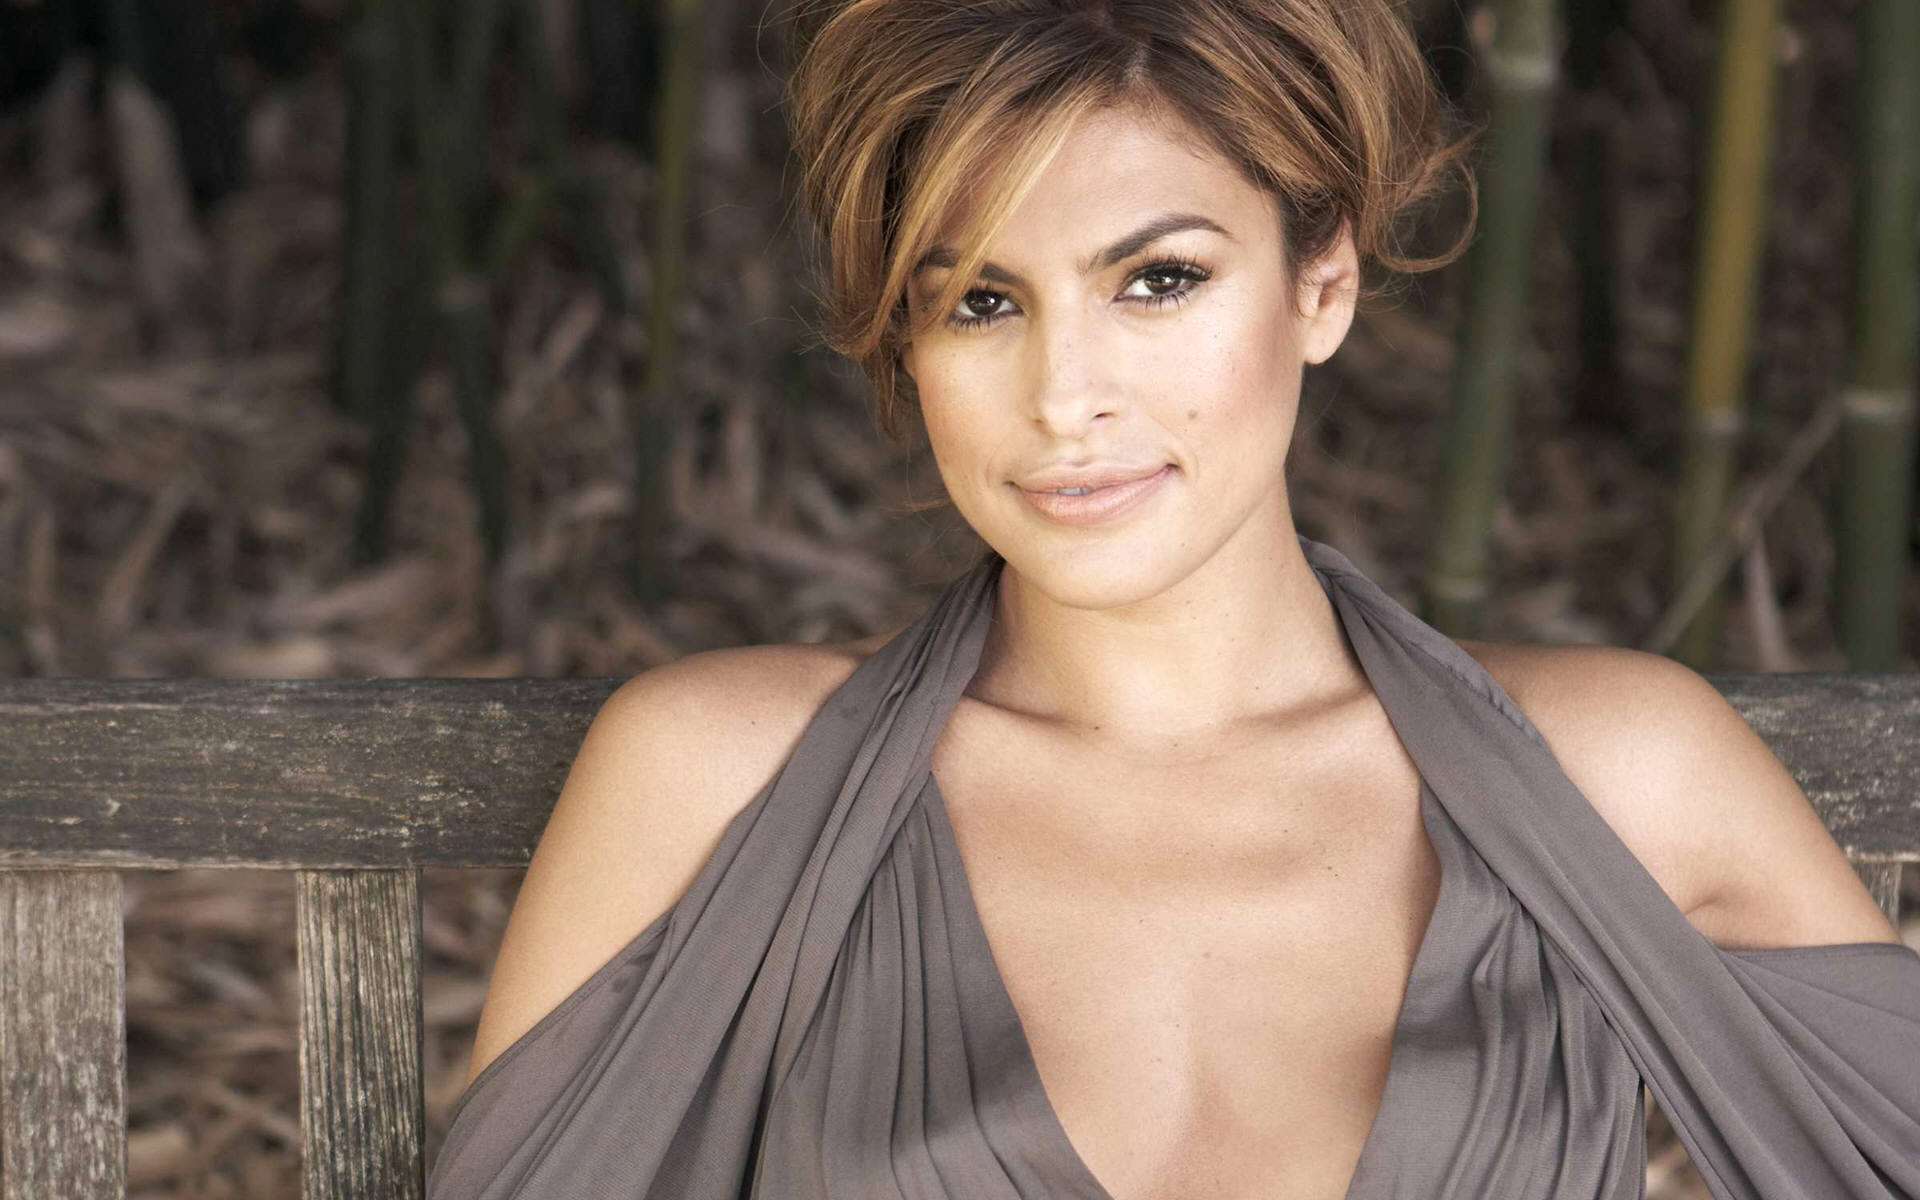 Eva Mendes Cute Image Wallpaper Hd Celebrities 4k Wallpapers Images And Background